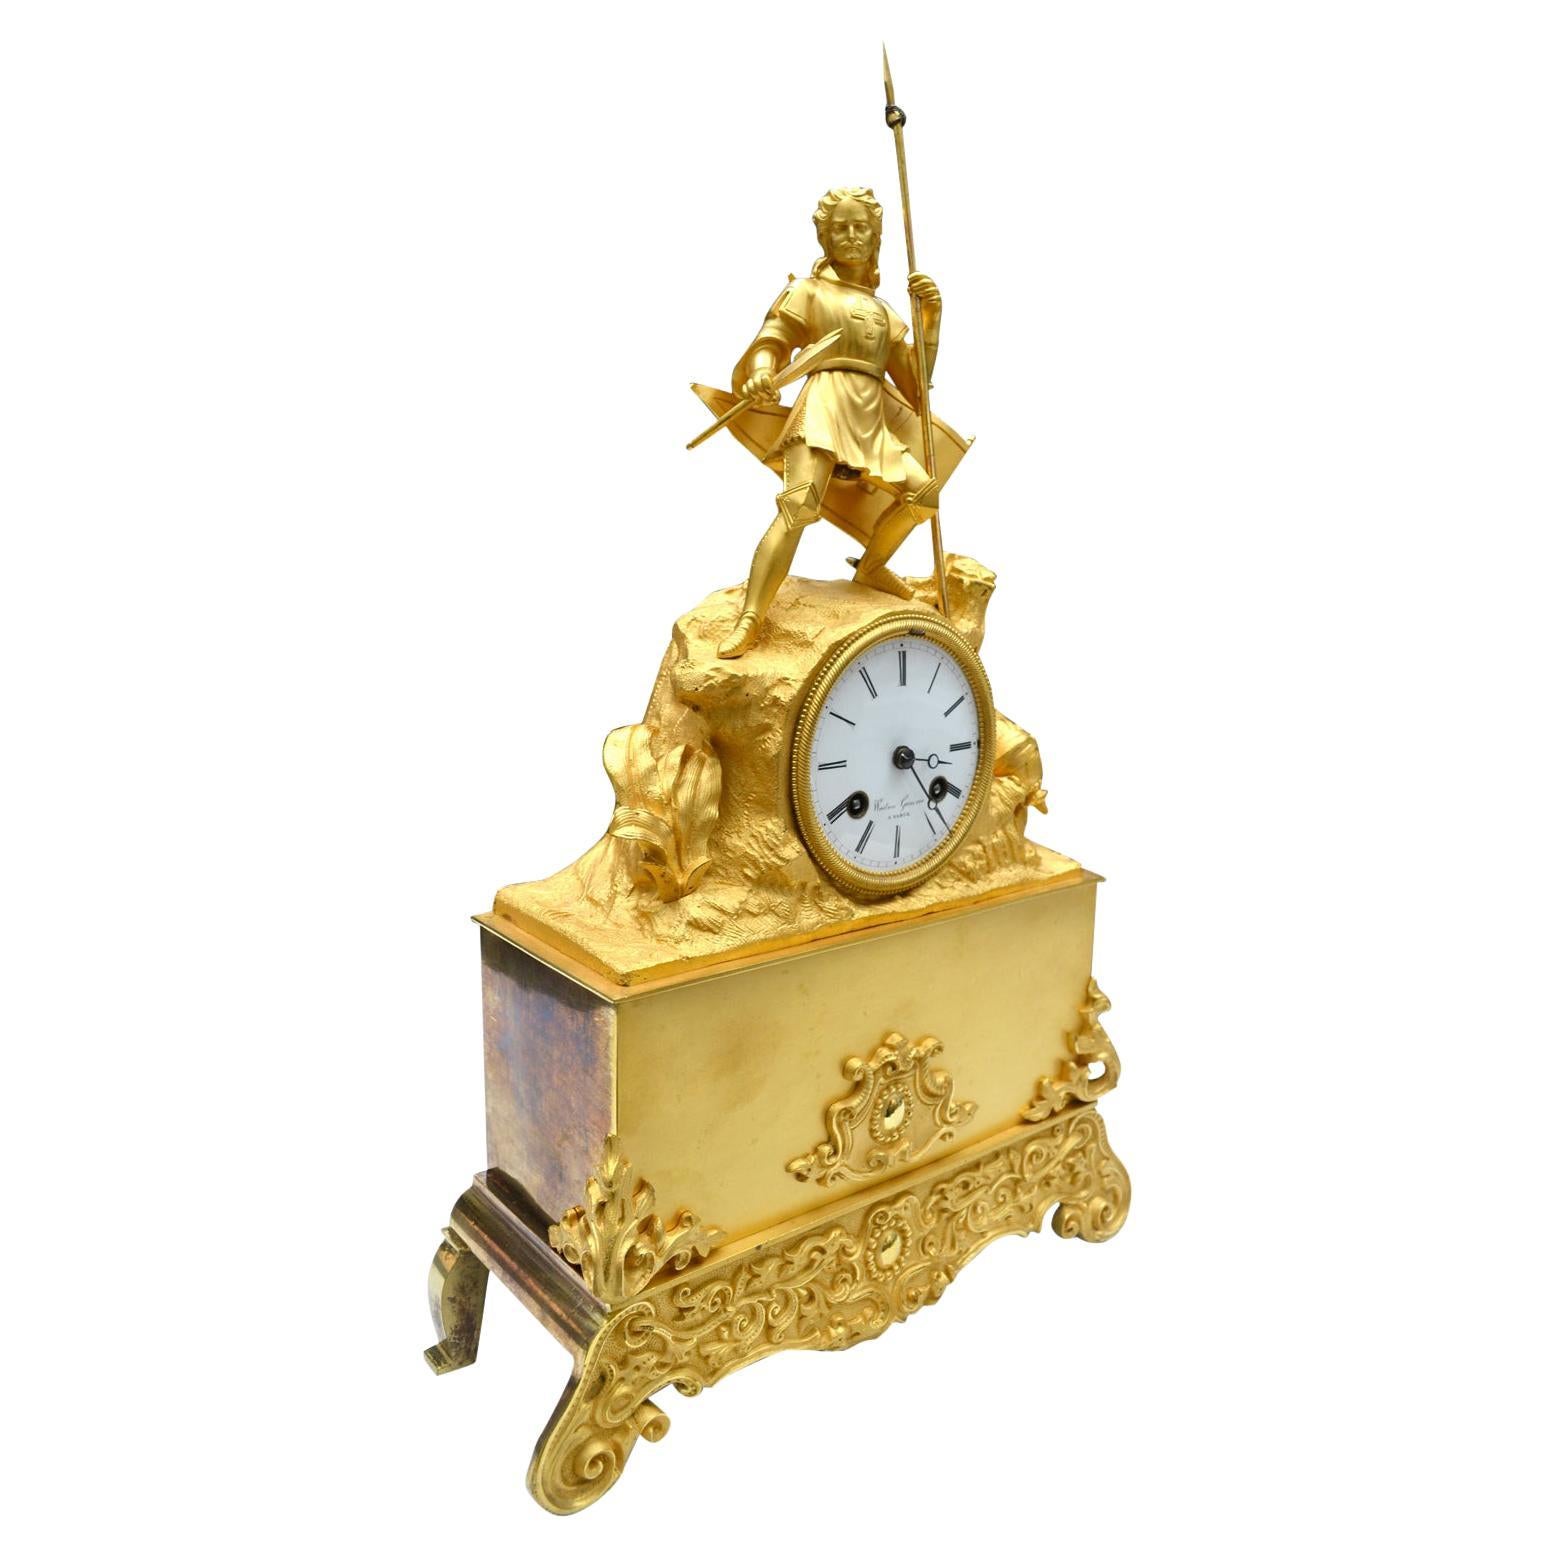 Napoleon III Gilt Bronze Clock of a  Victorious Crusader Knight  in Battle